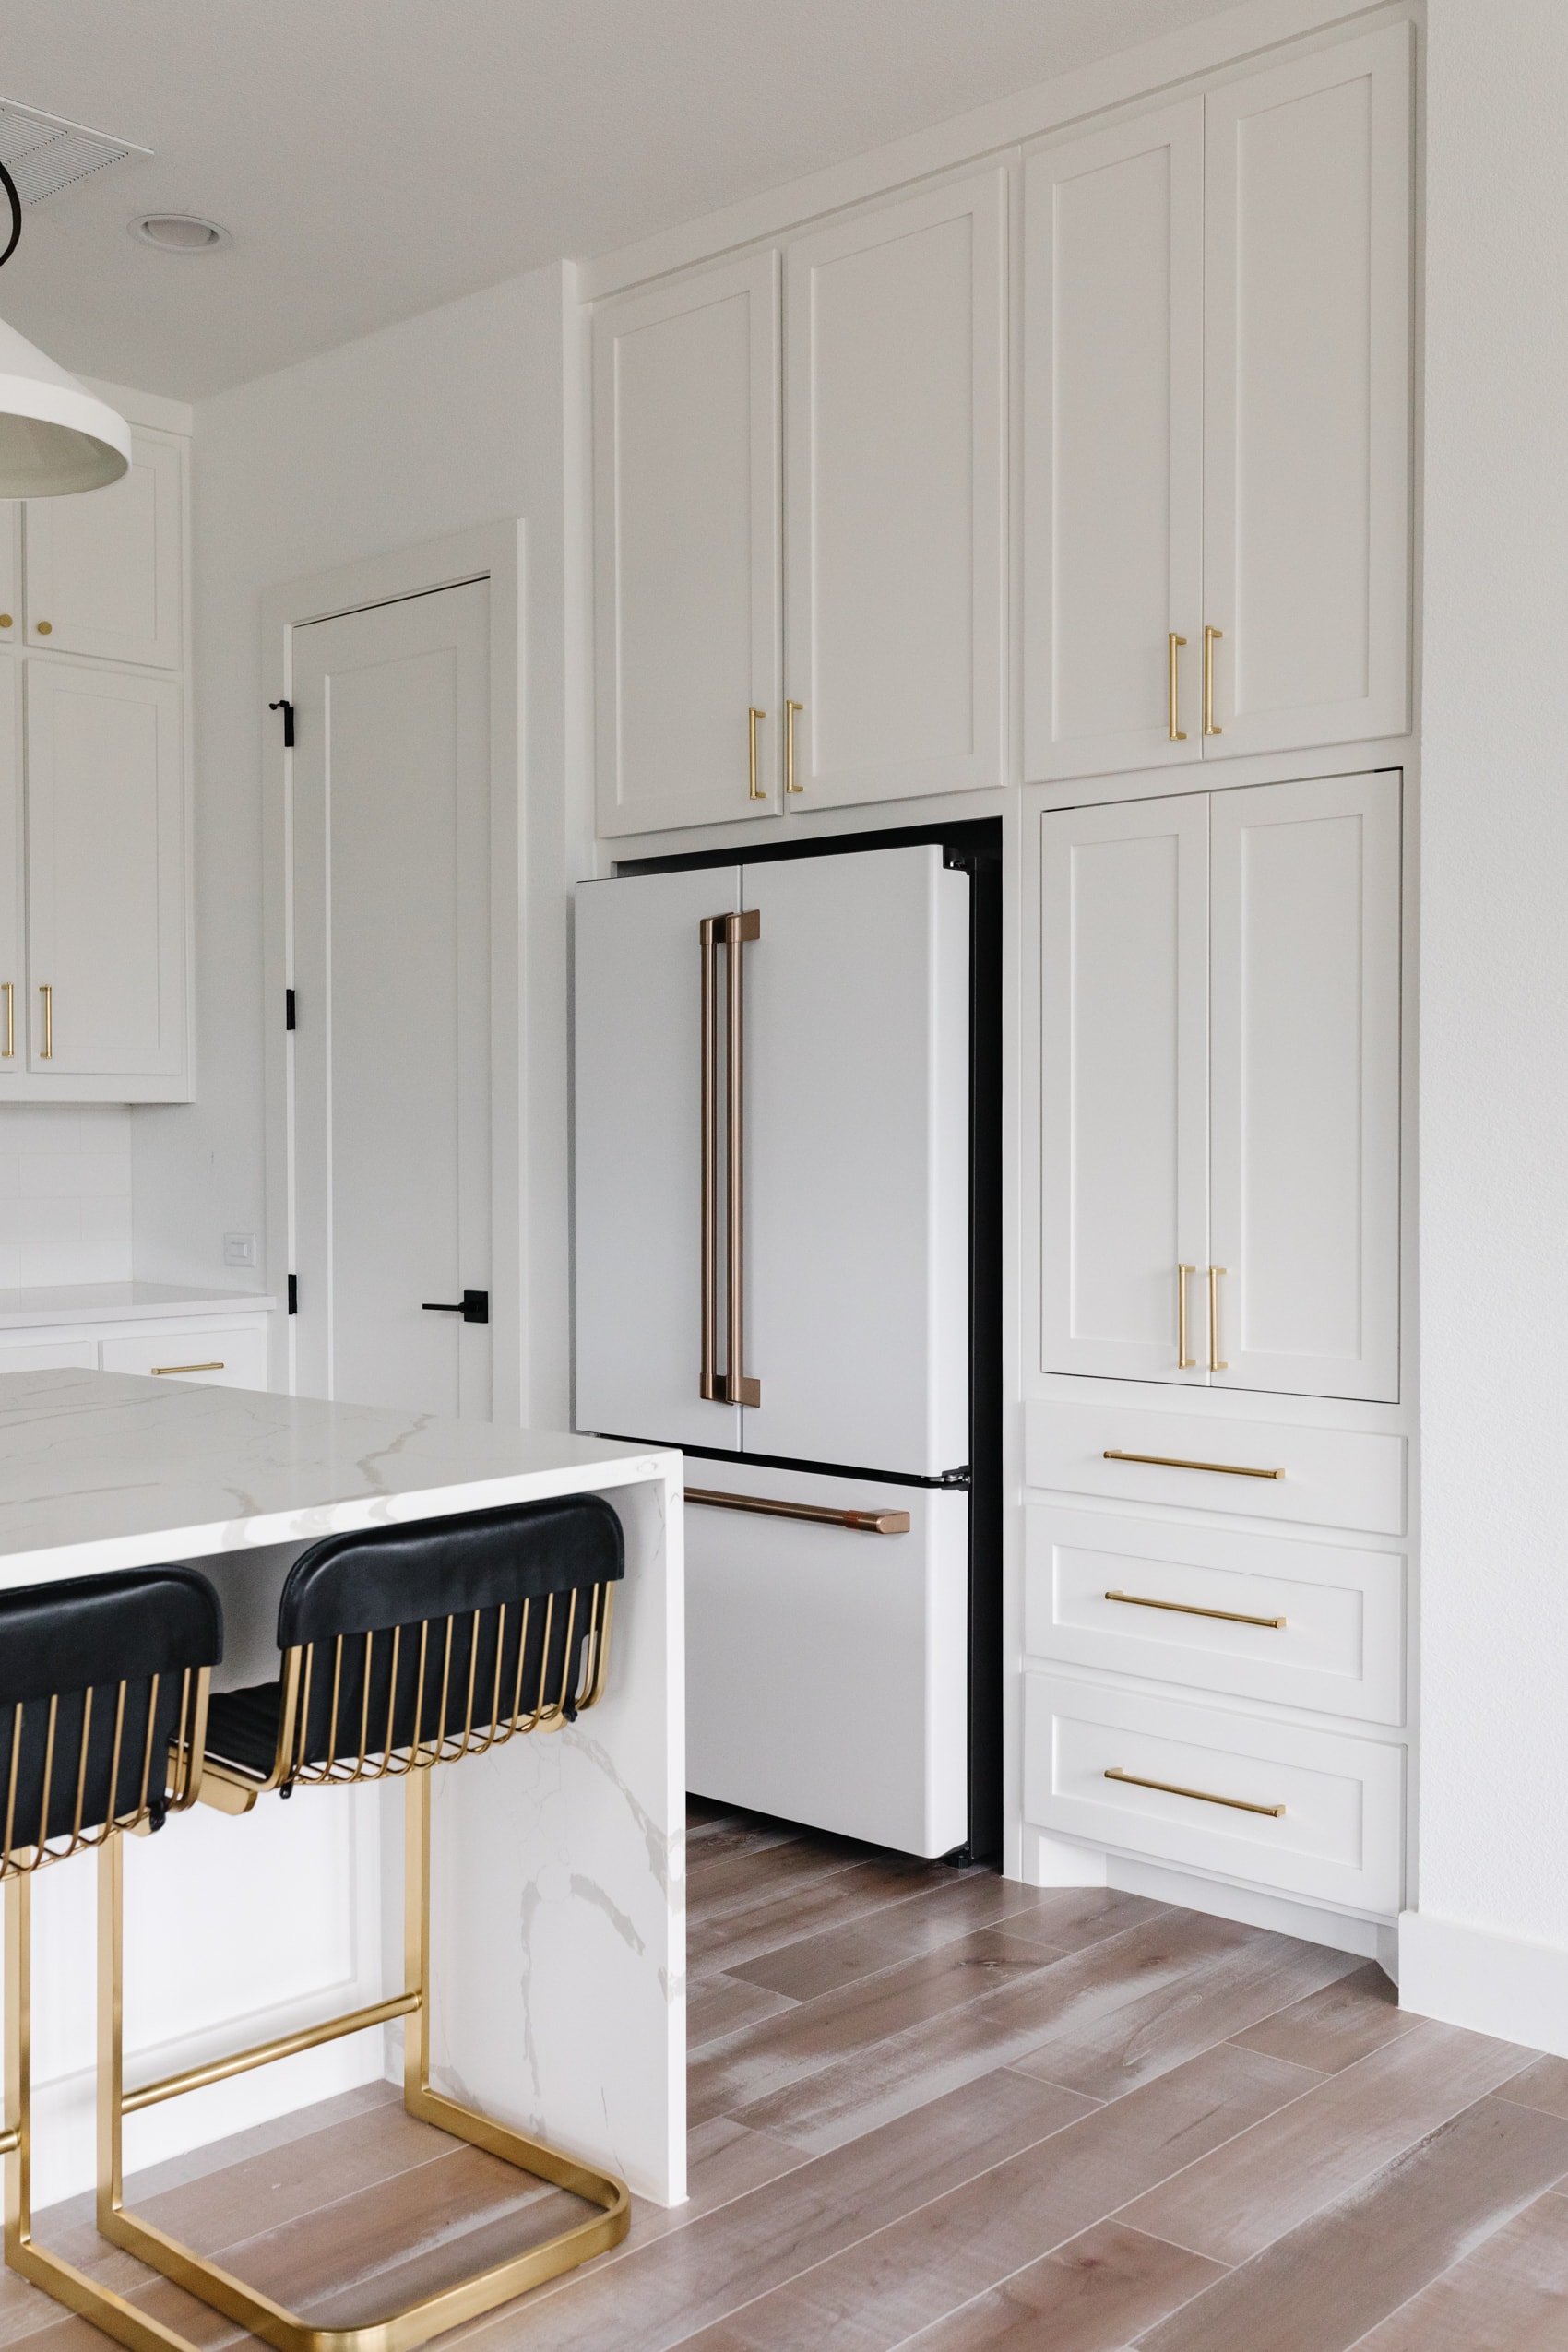 White kitchen cabinets with gold bar pulls